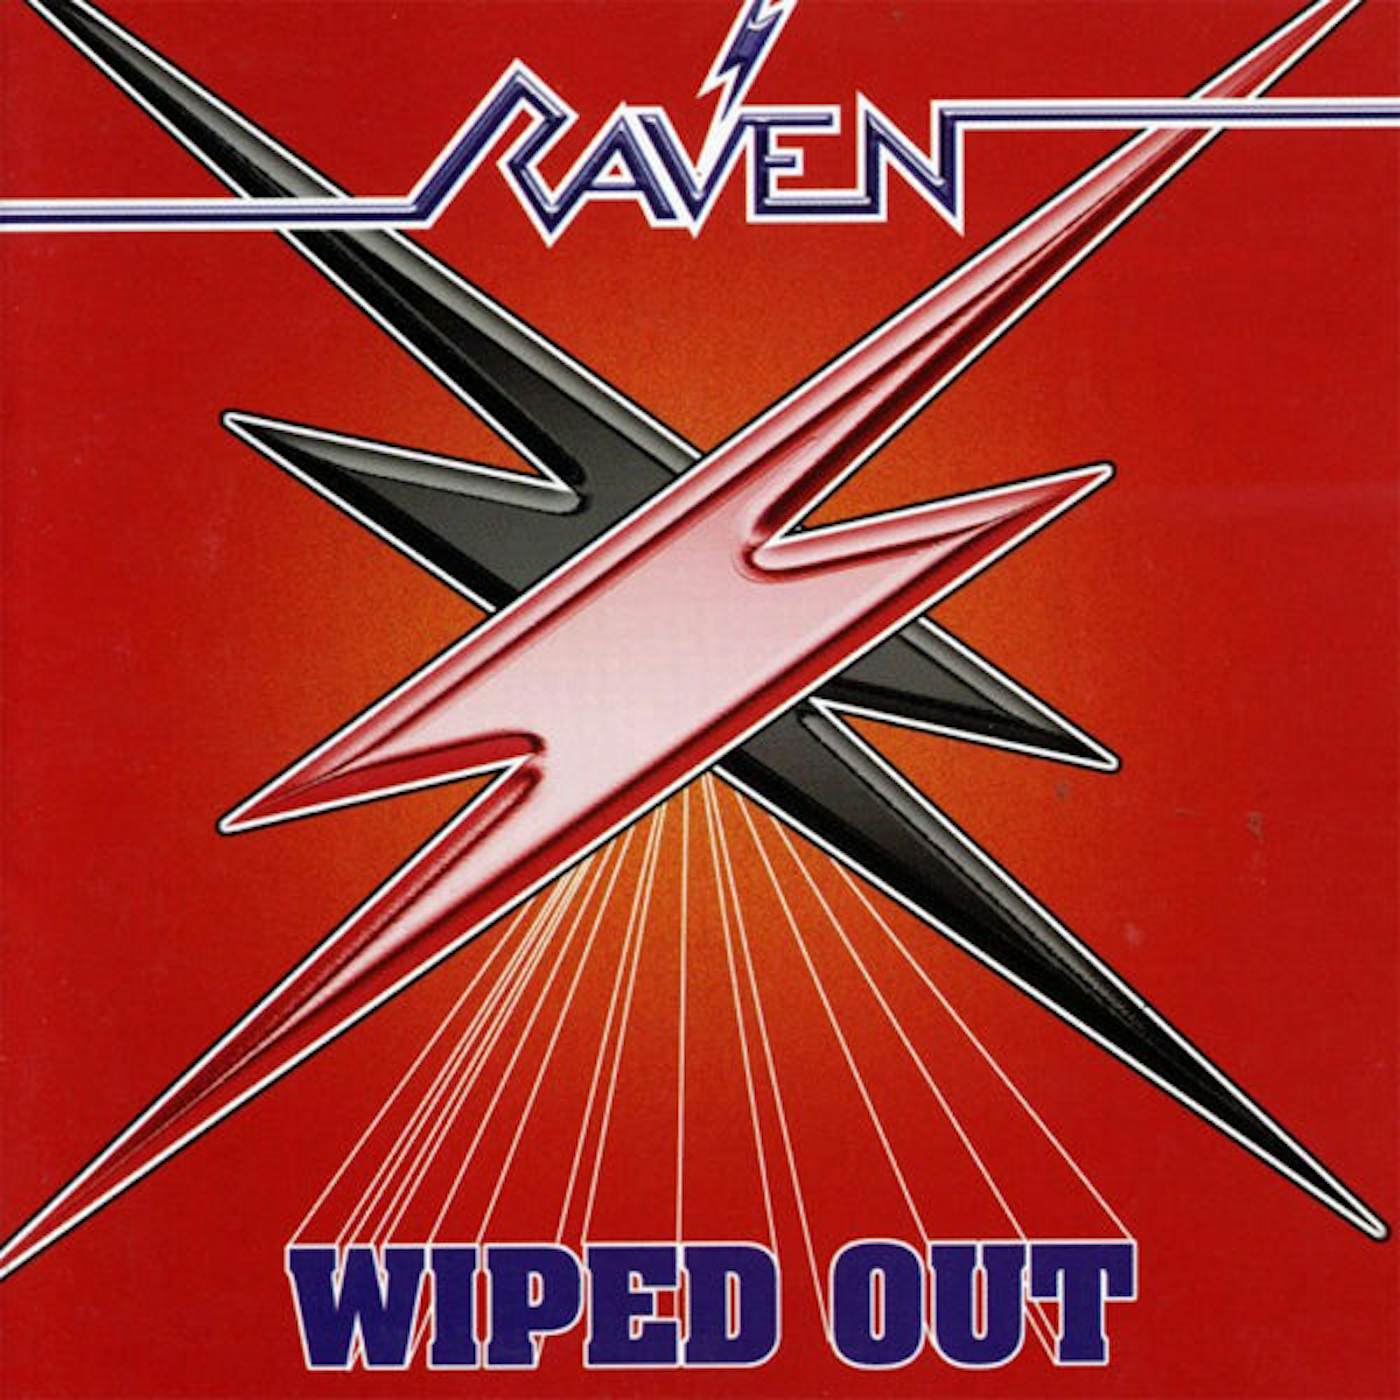 Raven LP - Wiped Out (Brown Vinyl +7'')